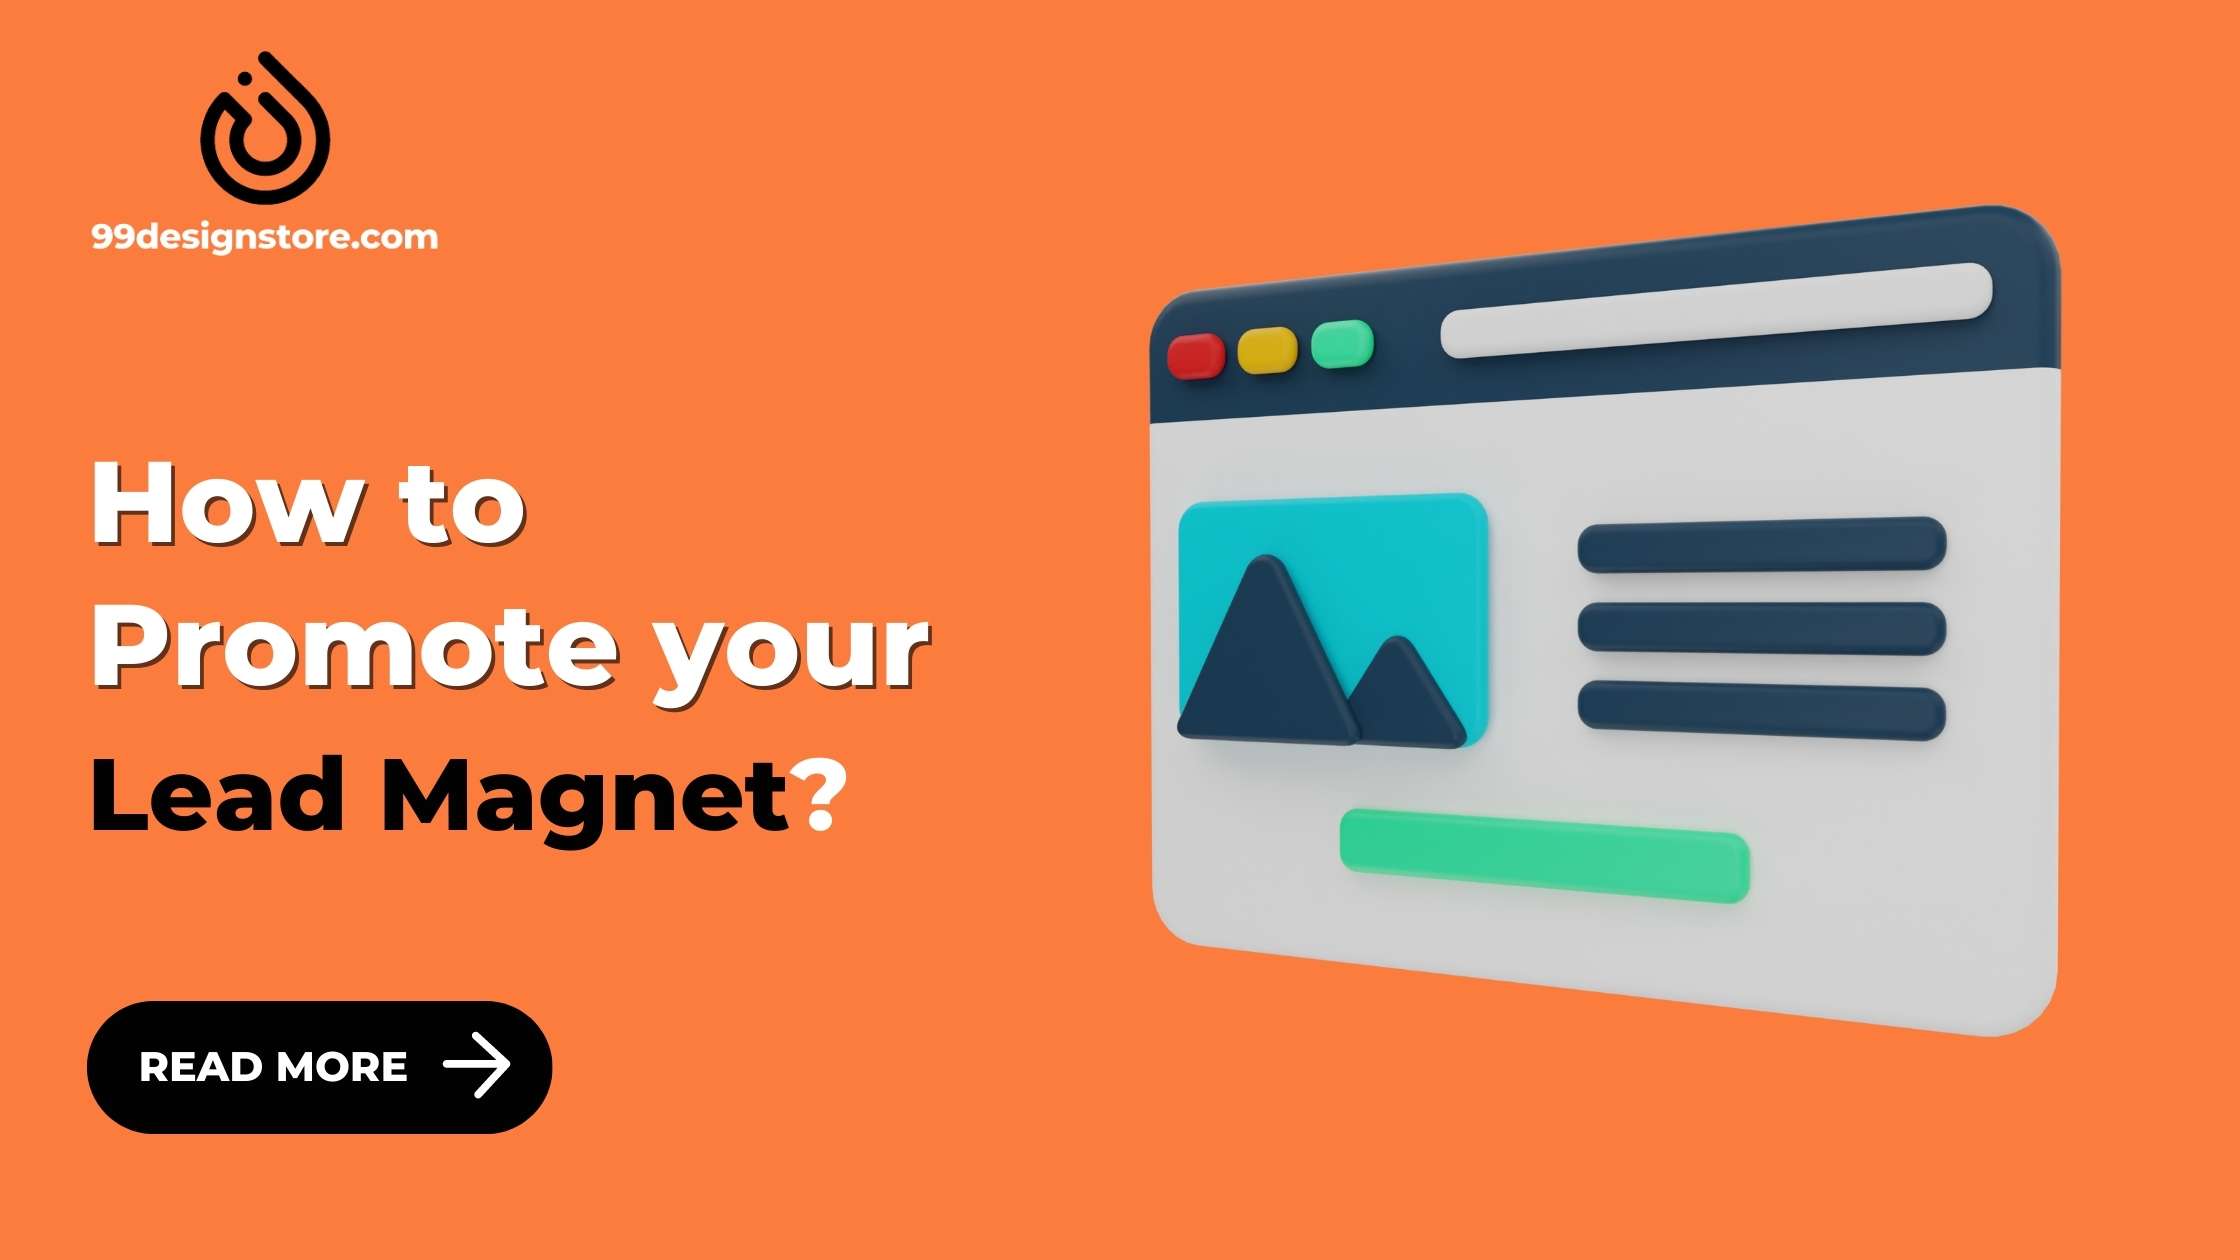 How to Promote your Lead Magnet?